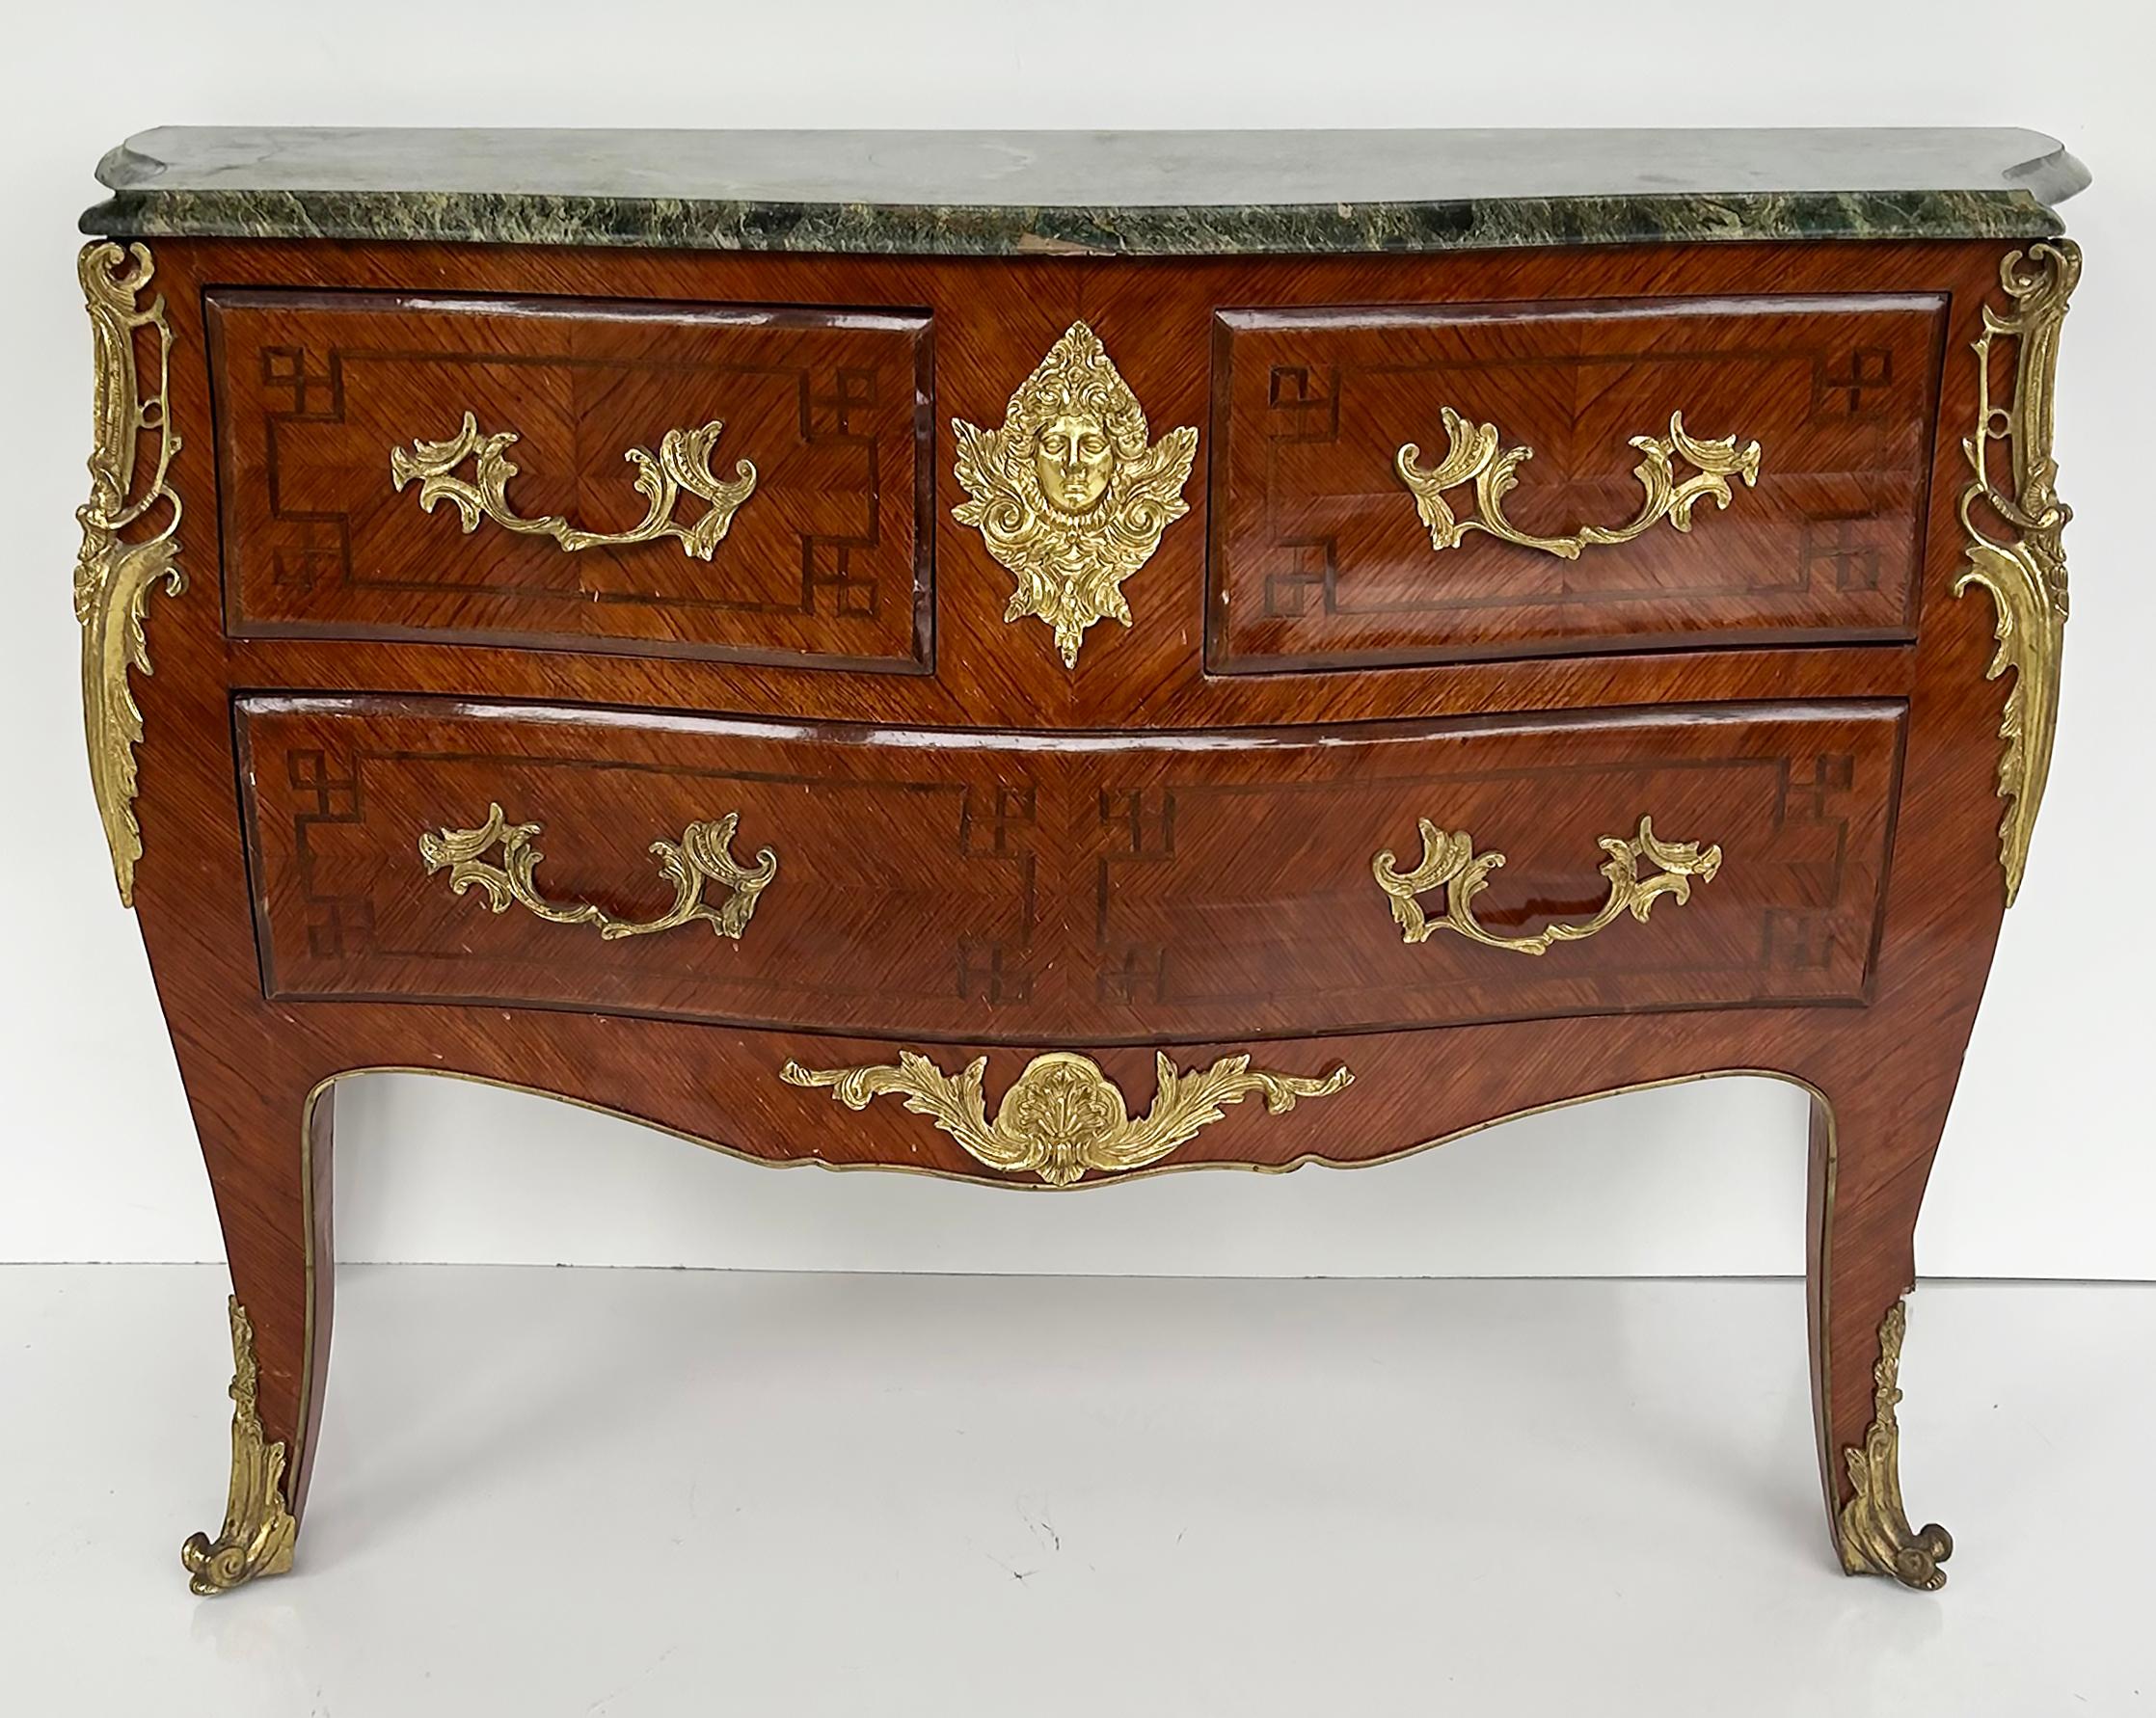 20th Century Marble Top Three Drawer Commode with Marquetry and Gilt Bronze Mounts, 20th C For Sale